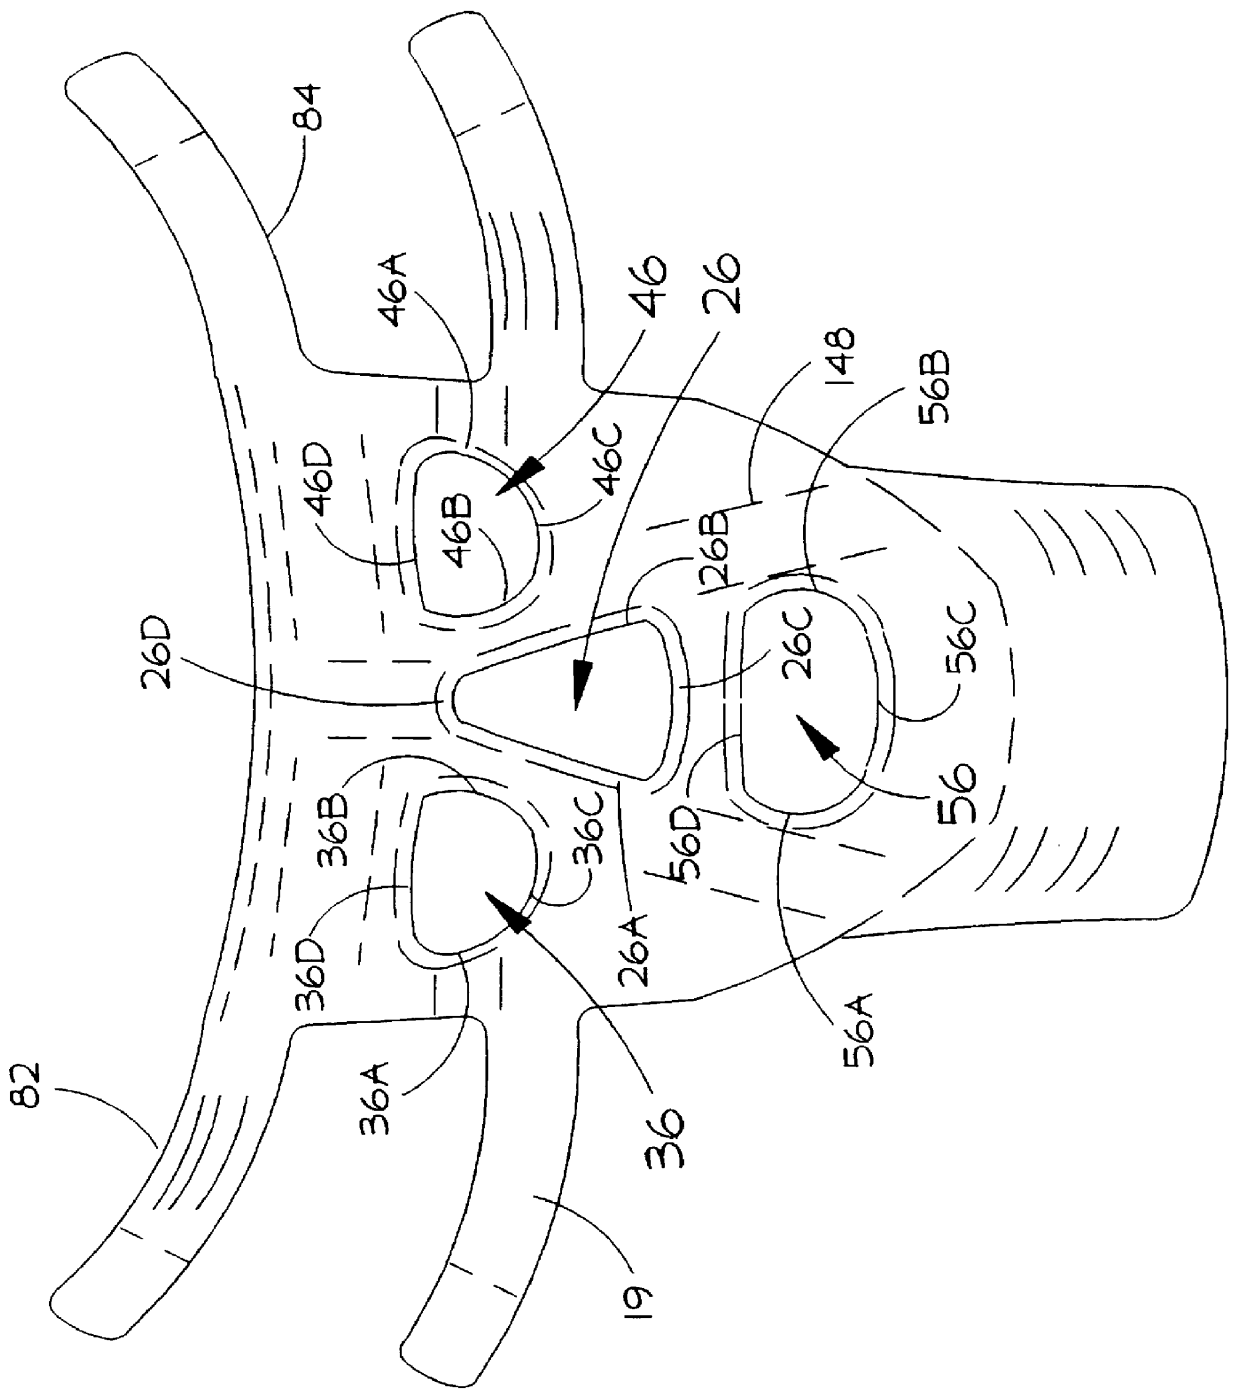 Cosmetic and therapeutic mask assembly with accessible and positionable magnetic pocket means